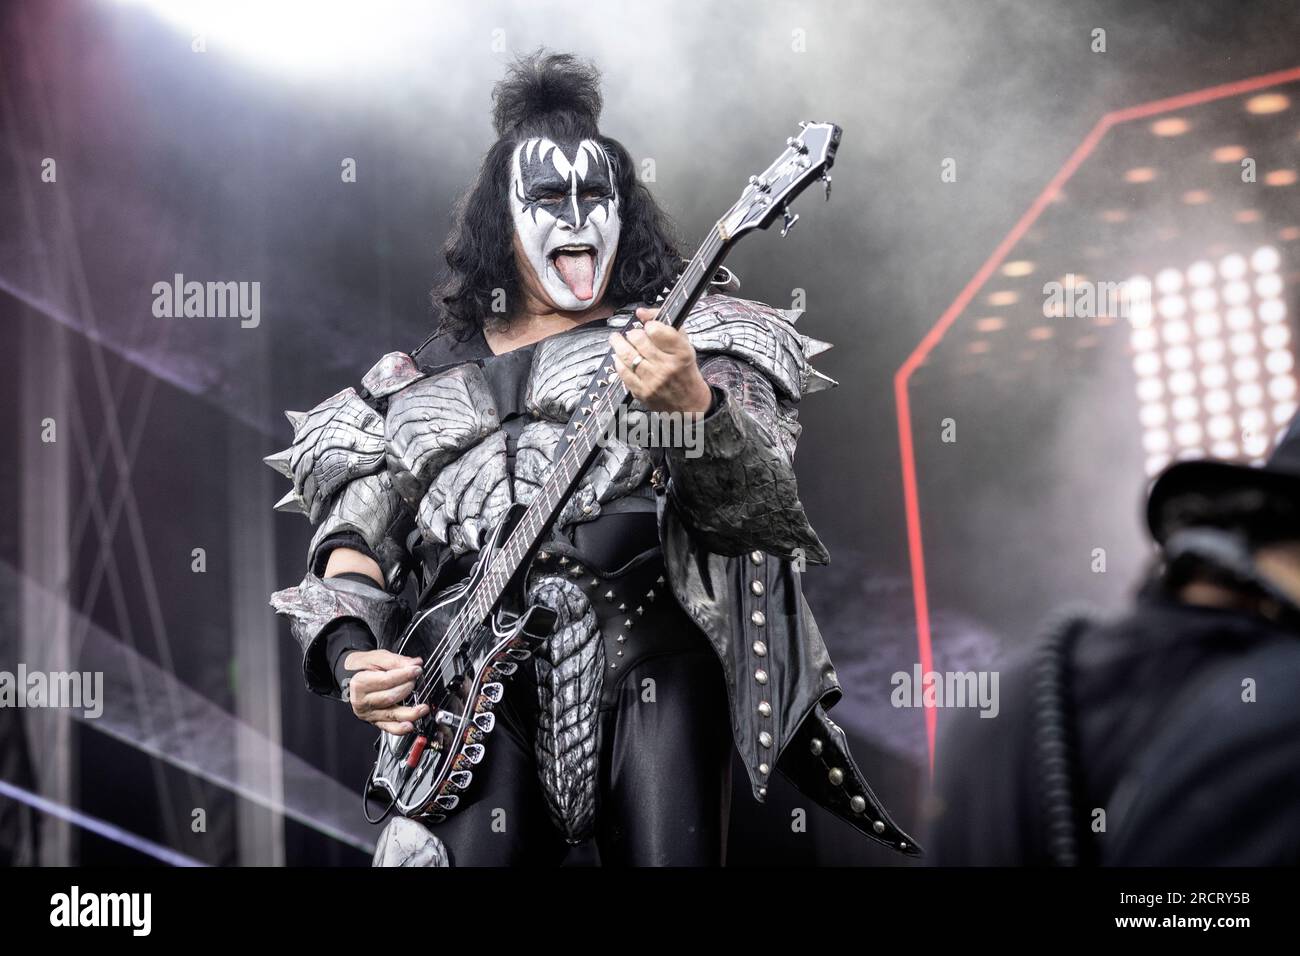 Tonsberg, Norway. 15th, July 2023. The American rock band Kiss performs a live concert at Kaldnes Vest in Tonsberg. Here vocalist and bass player Gene Simmons is seen live on stage. The concert was the last in Europe as part of the End of the Road World Tour. (Photo credit: Gonzales Photo - Terje Dokken). Stock Photo